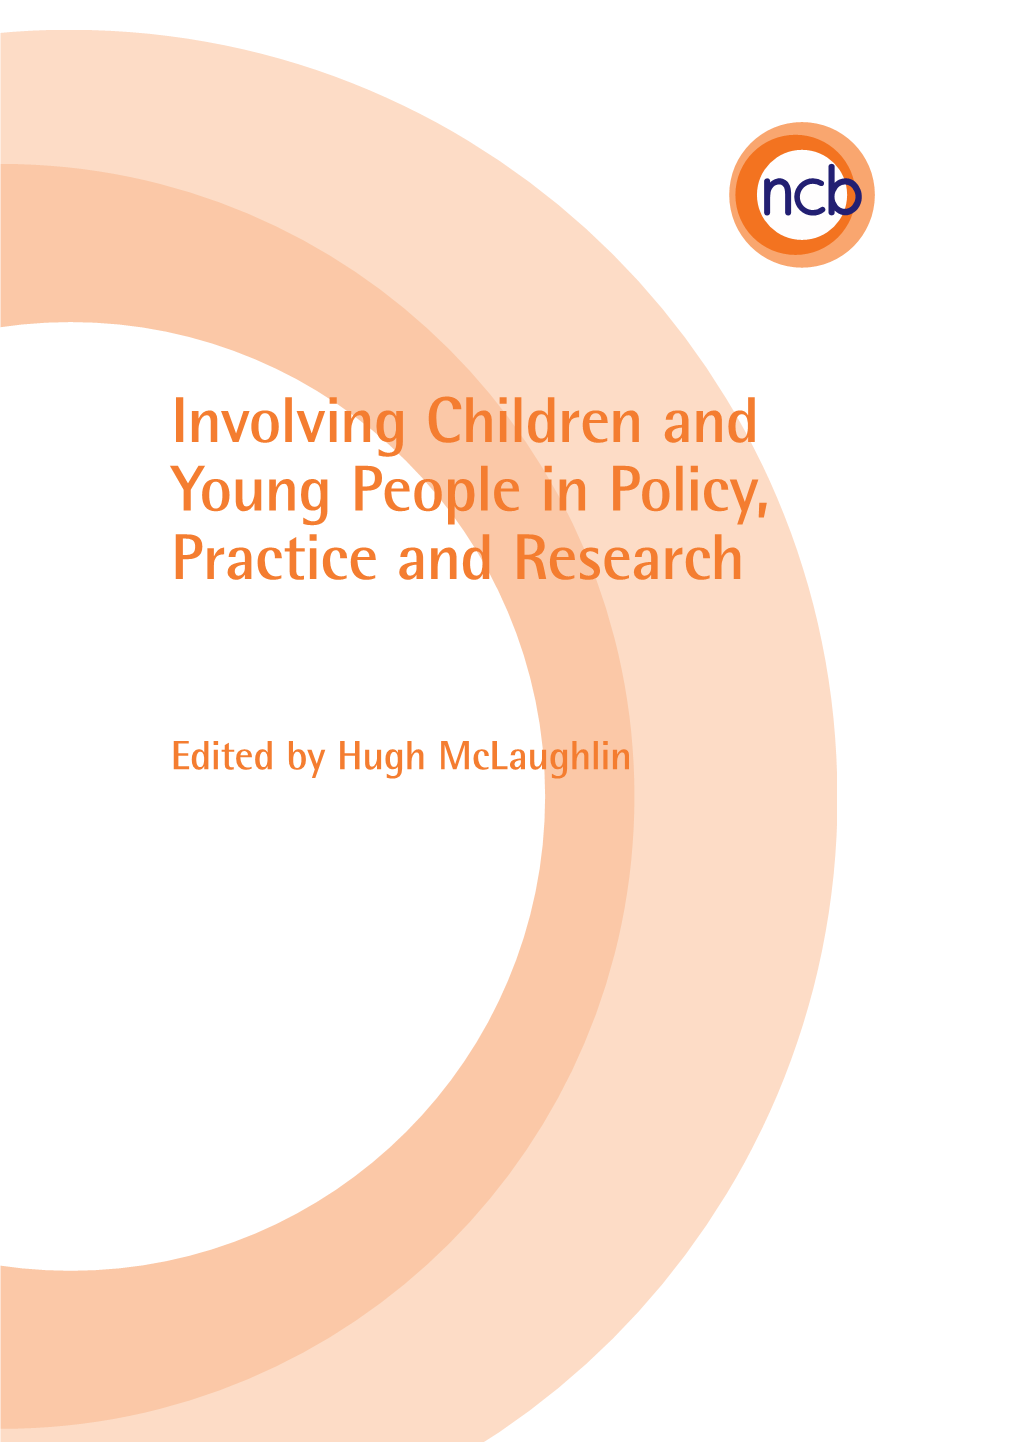 Involving Children and Young People in Policy, Practice and Research